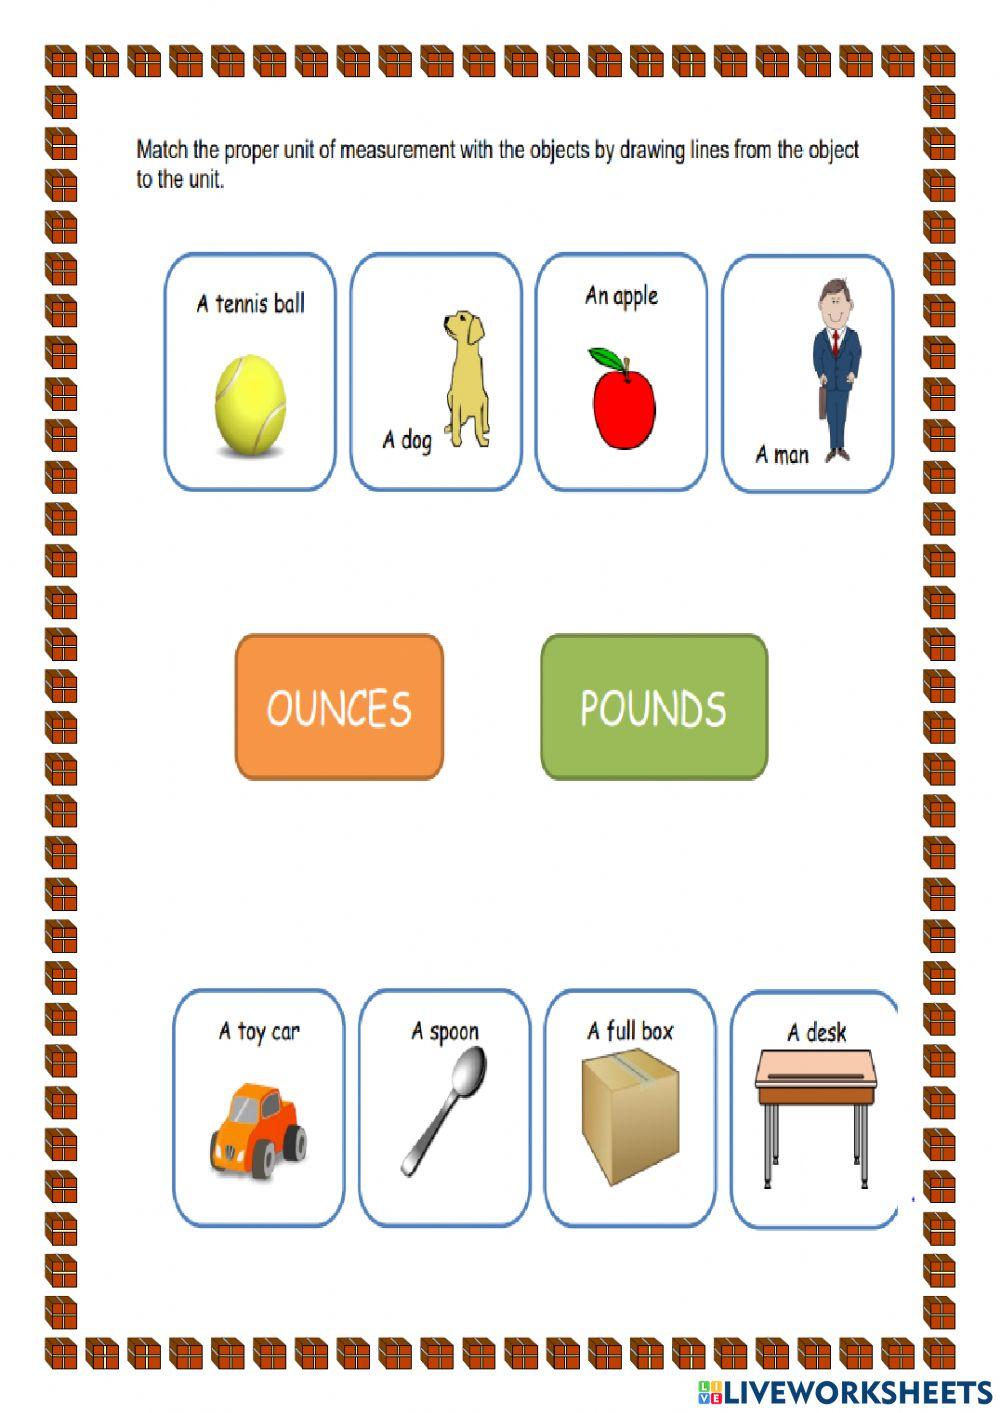 Measurement of weight